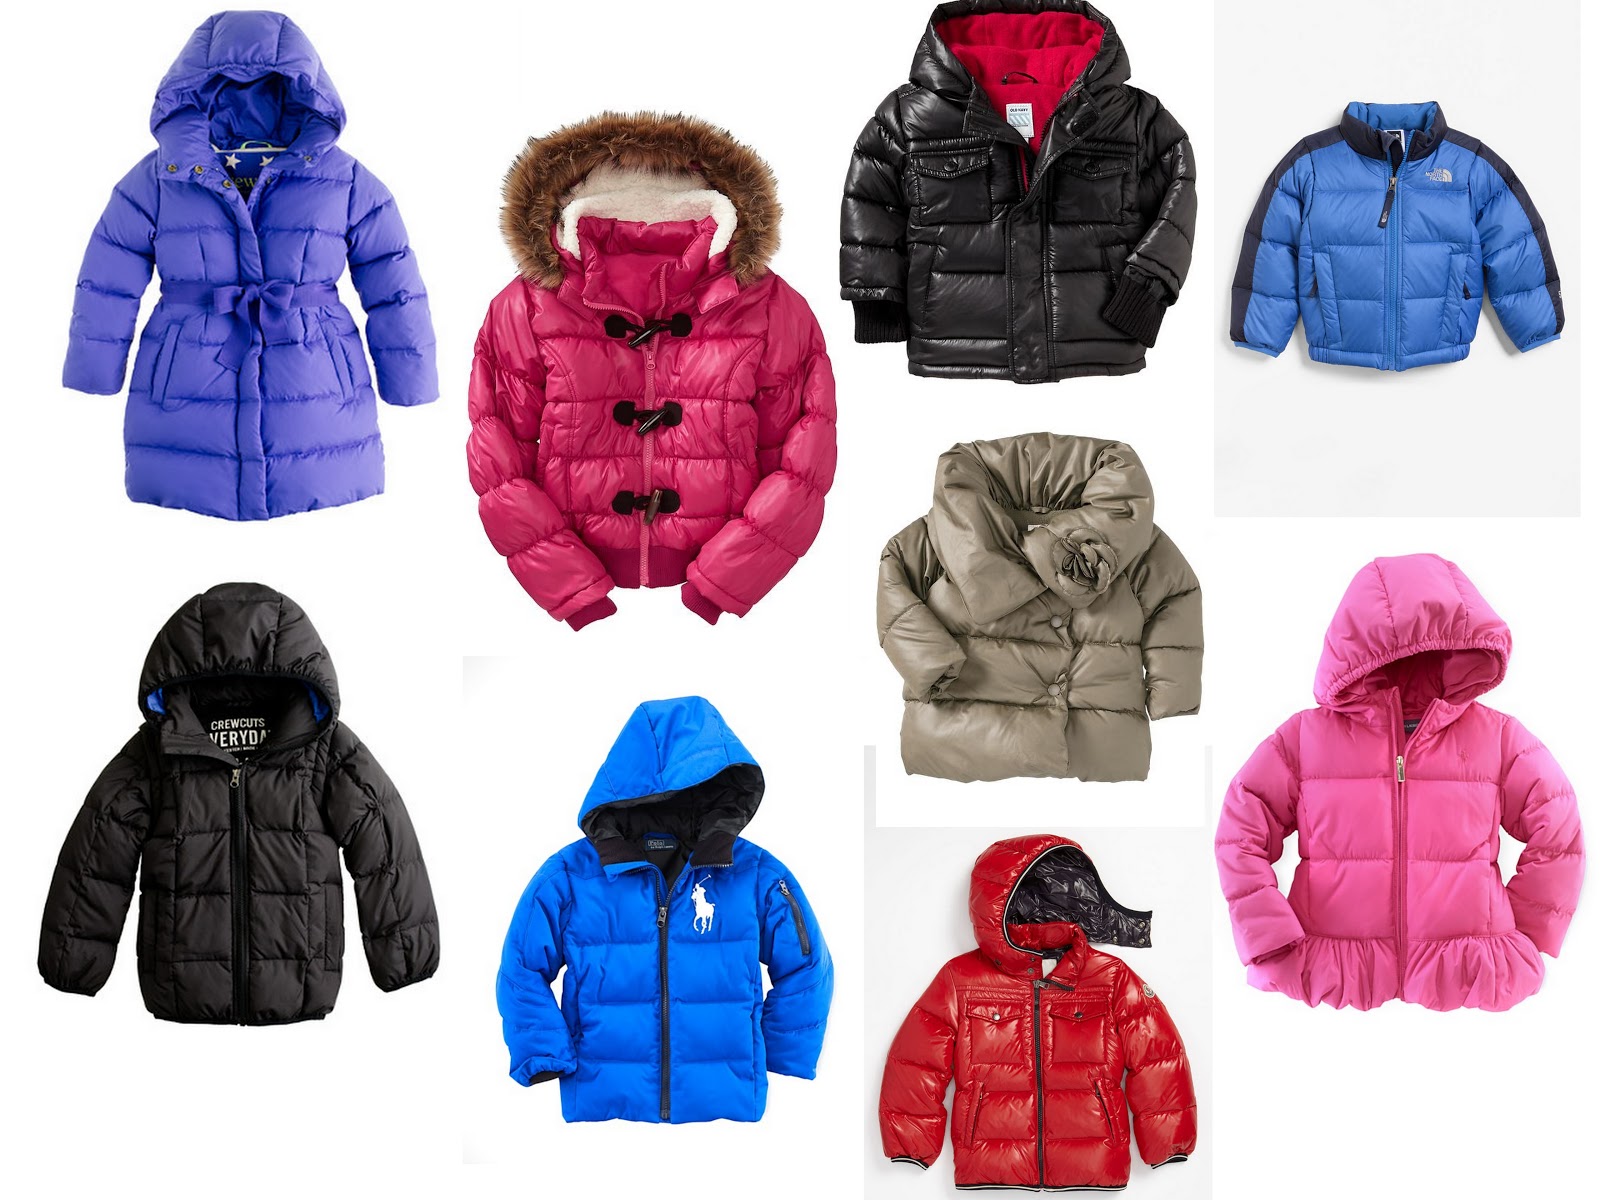 Big Style Jackets For Little Kids